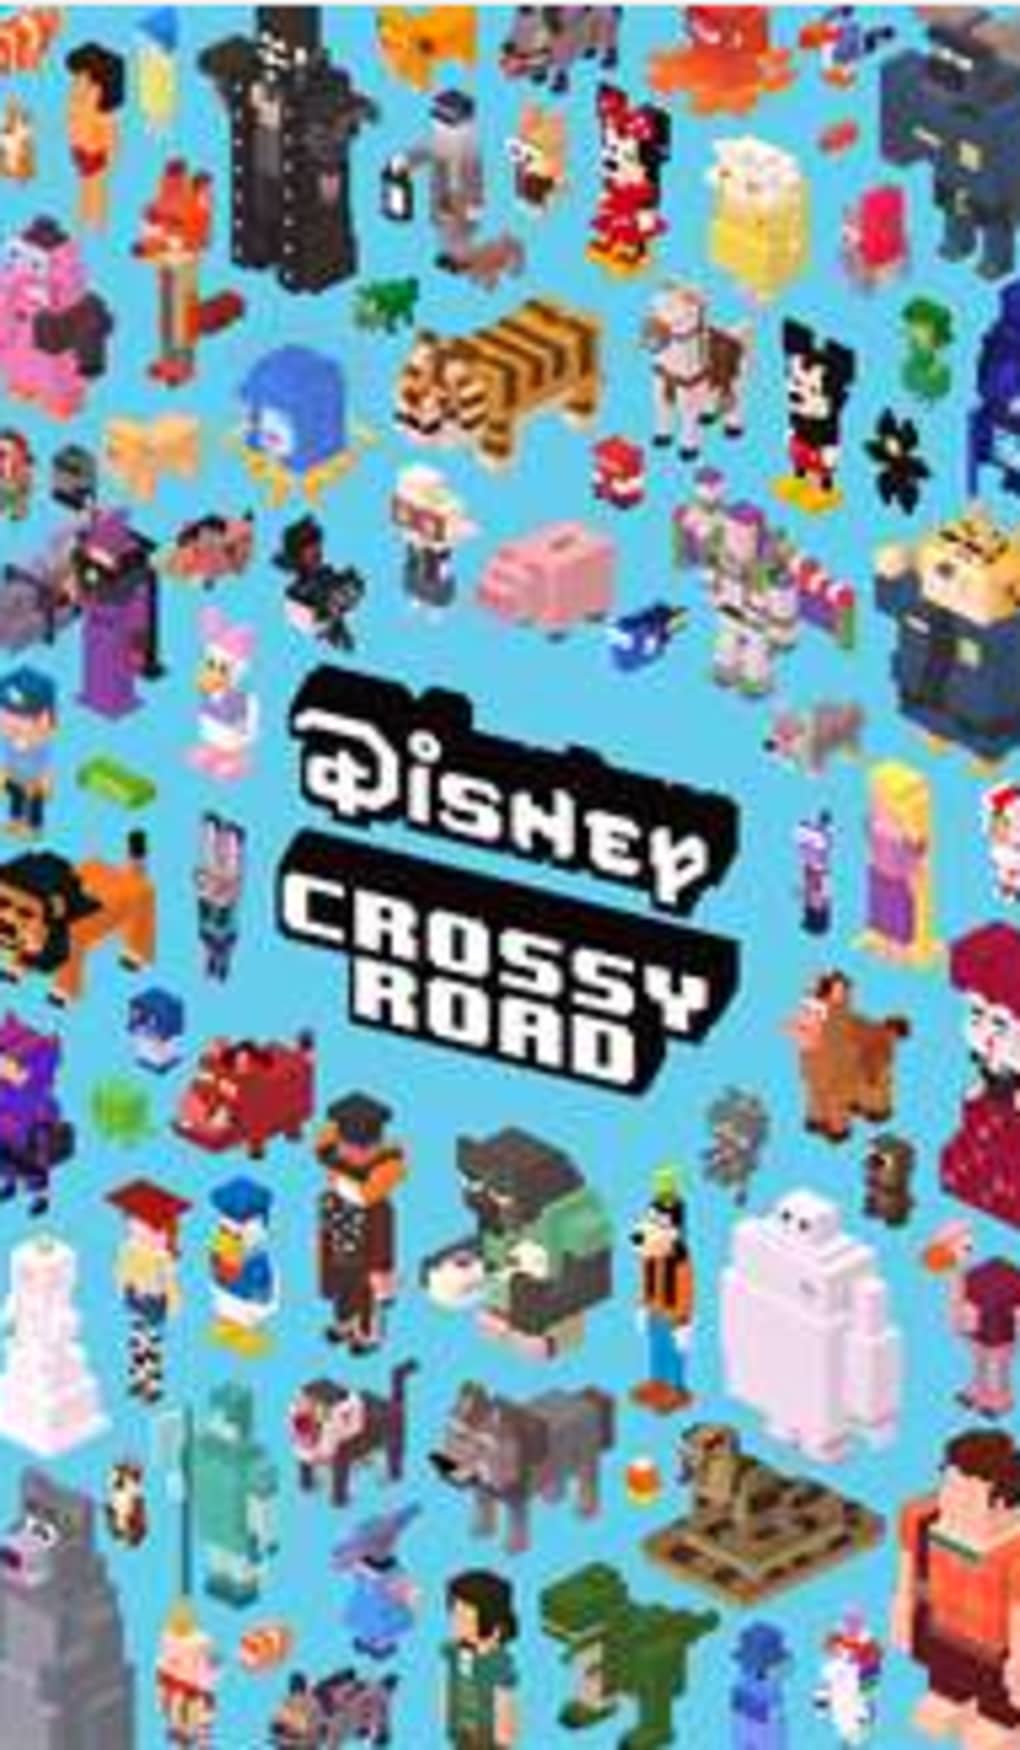 Disney crossy road download download easy viewer for pc